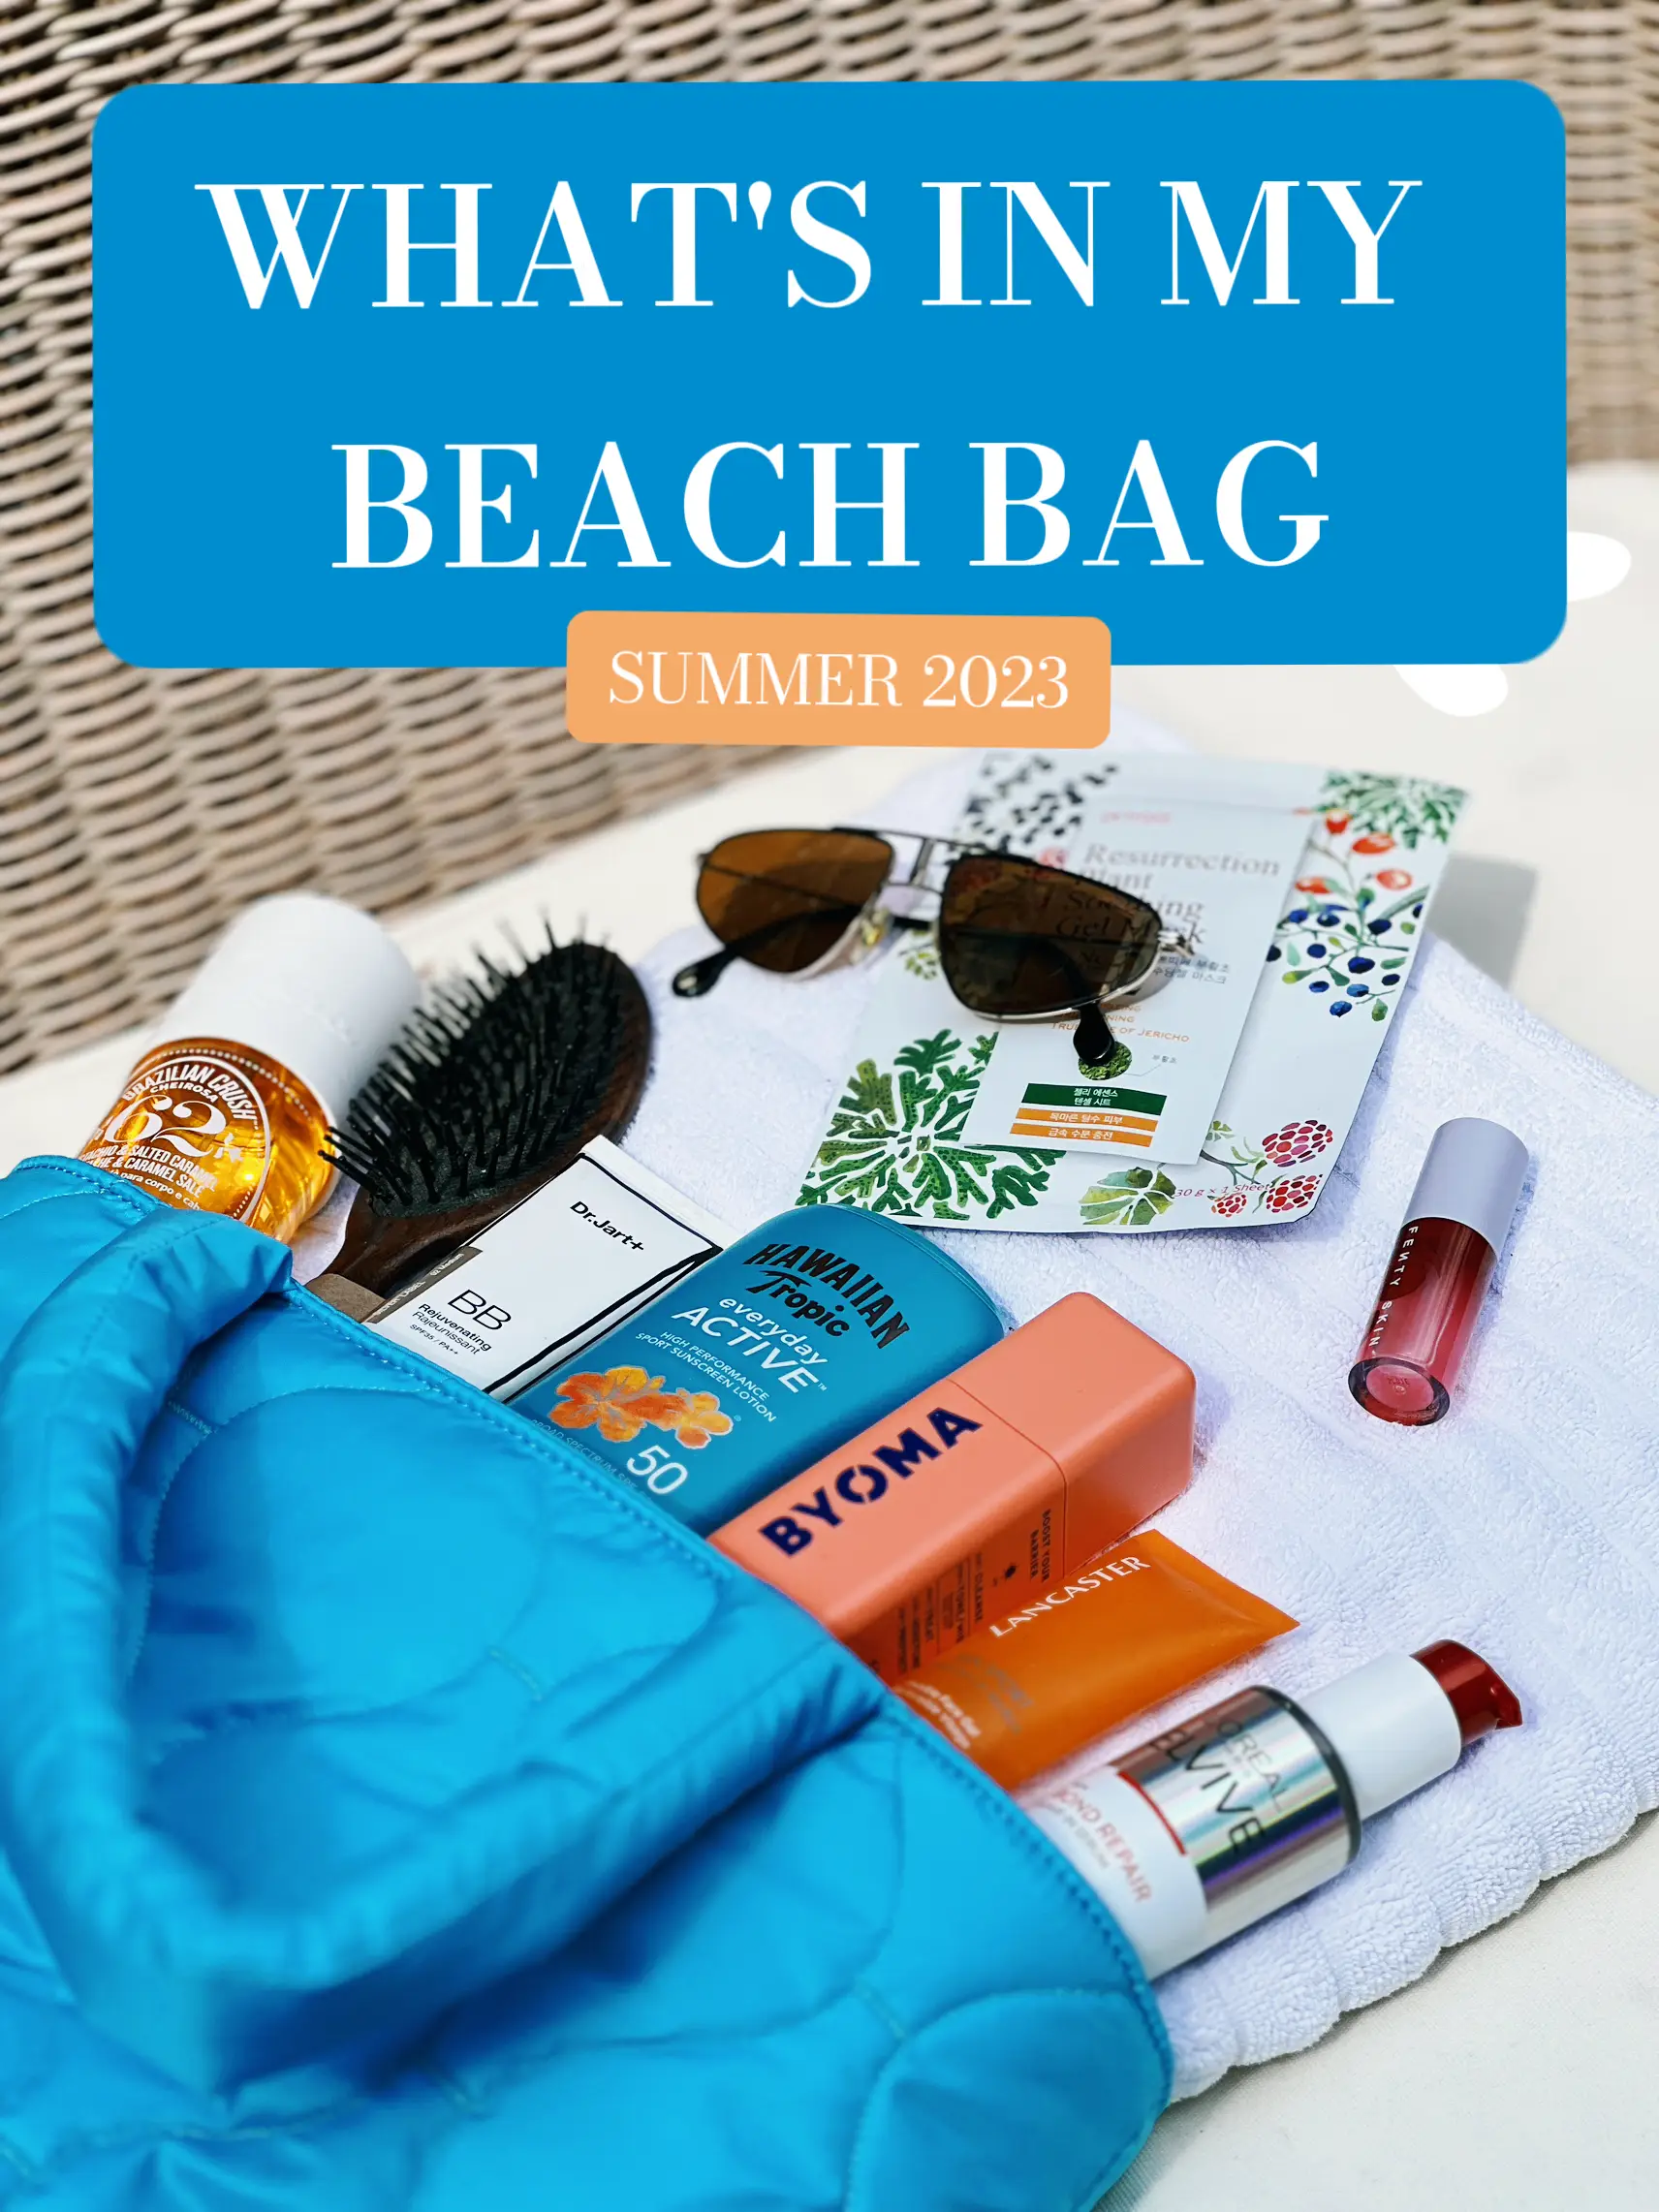 WHAT'S IN MY BEACH BAG, Gallery posted by Sophia Stro